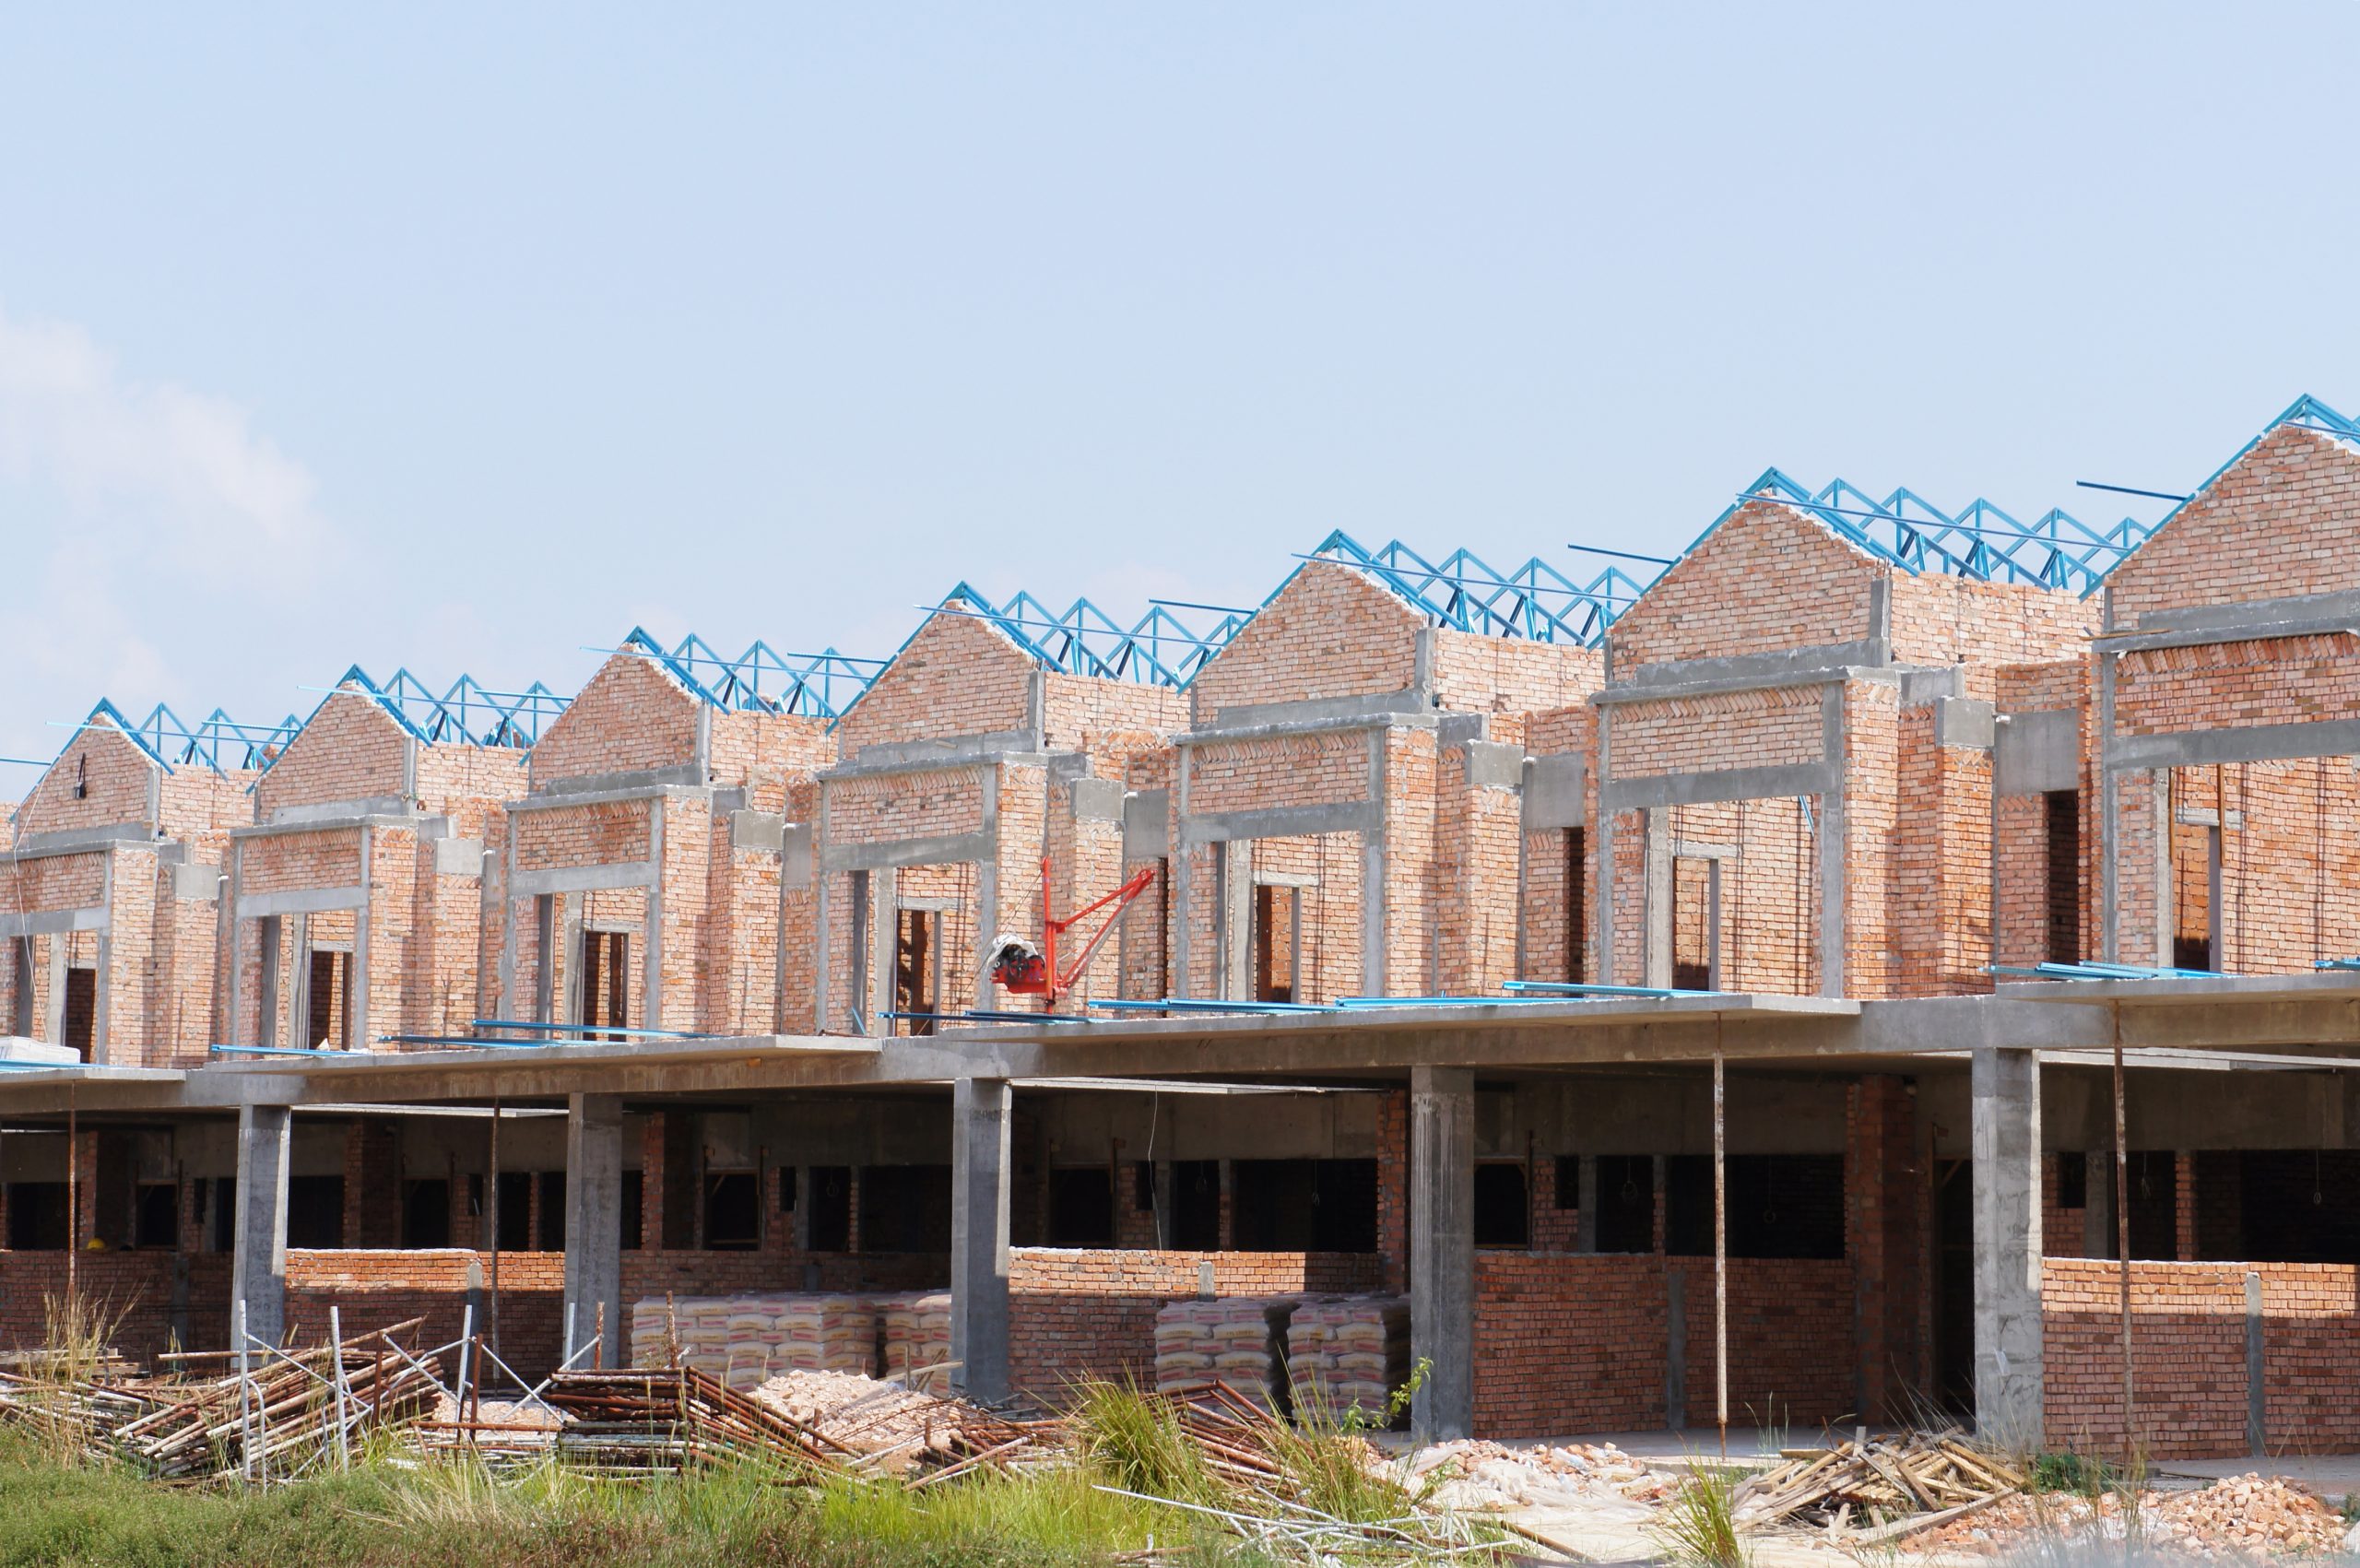 A row of residential dwellings are being constructed with a blue sky above